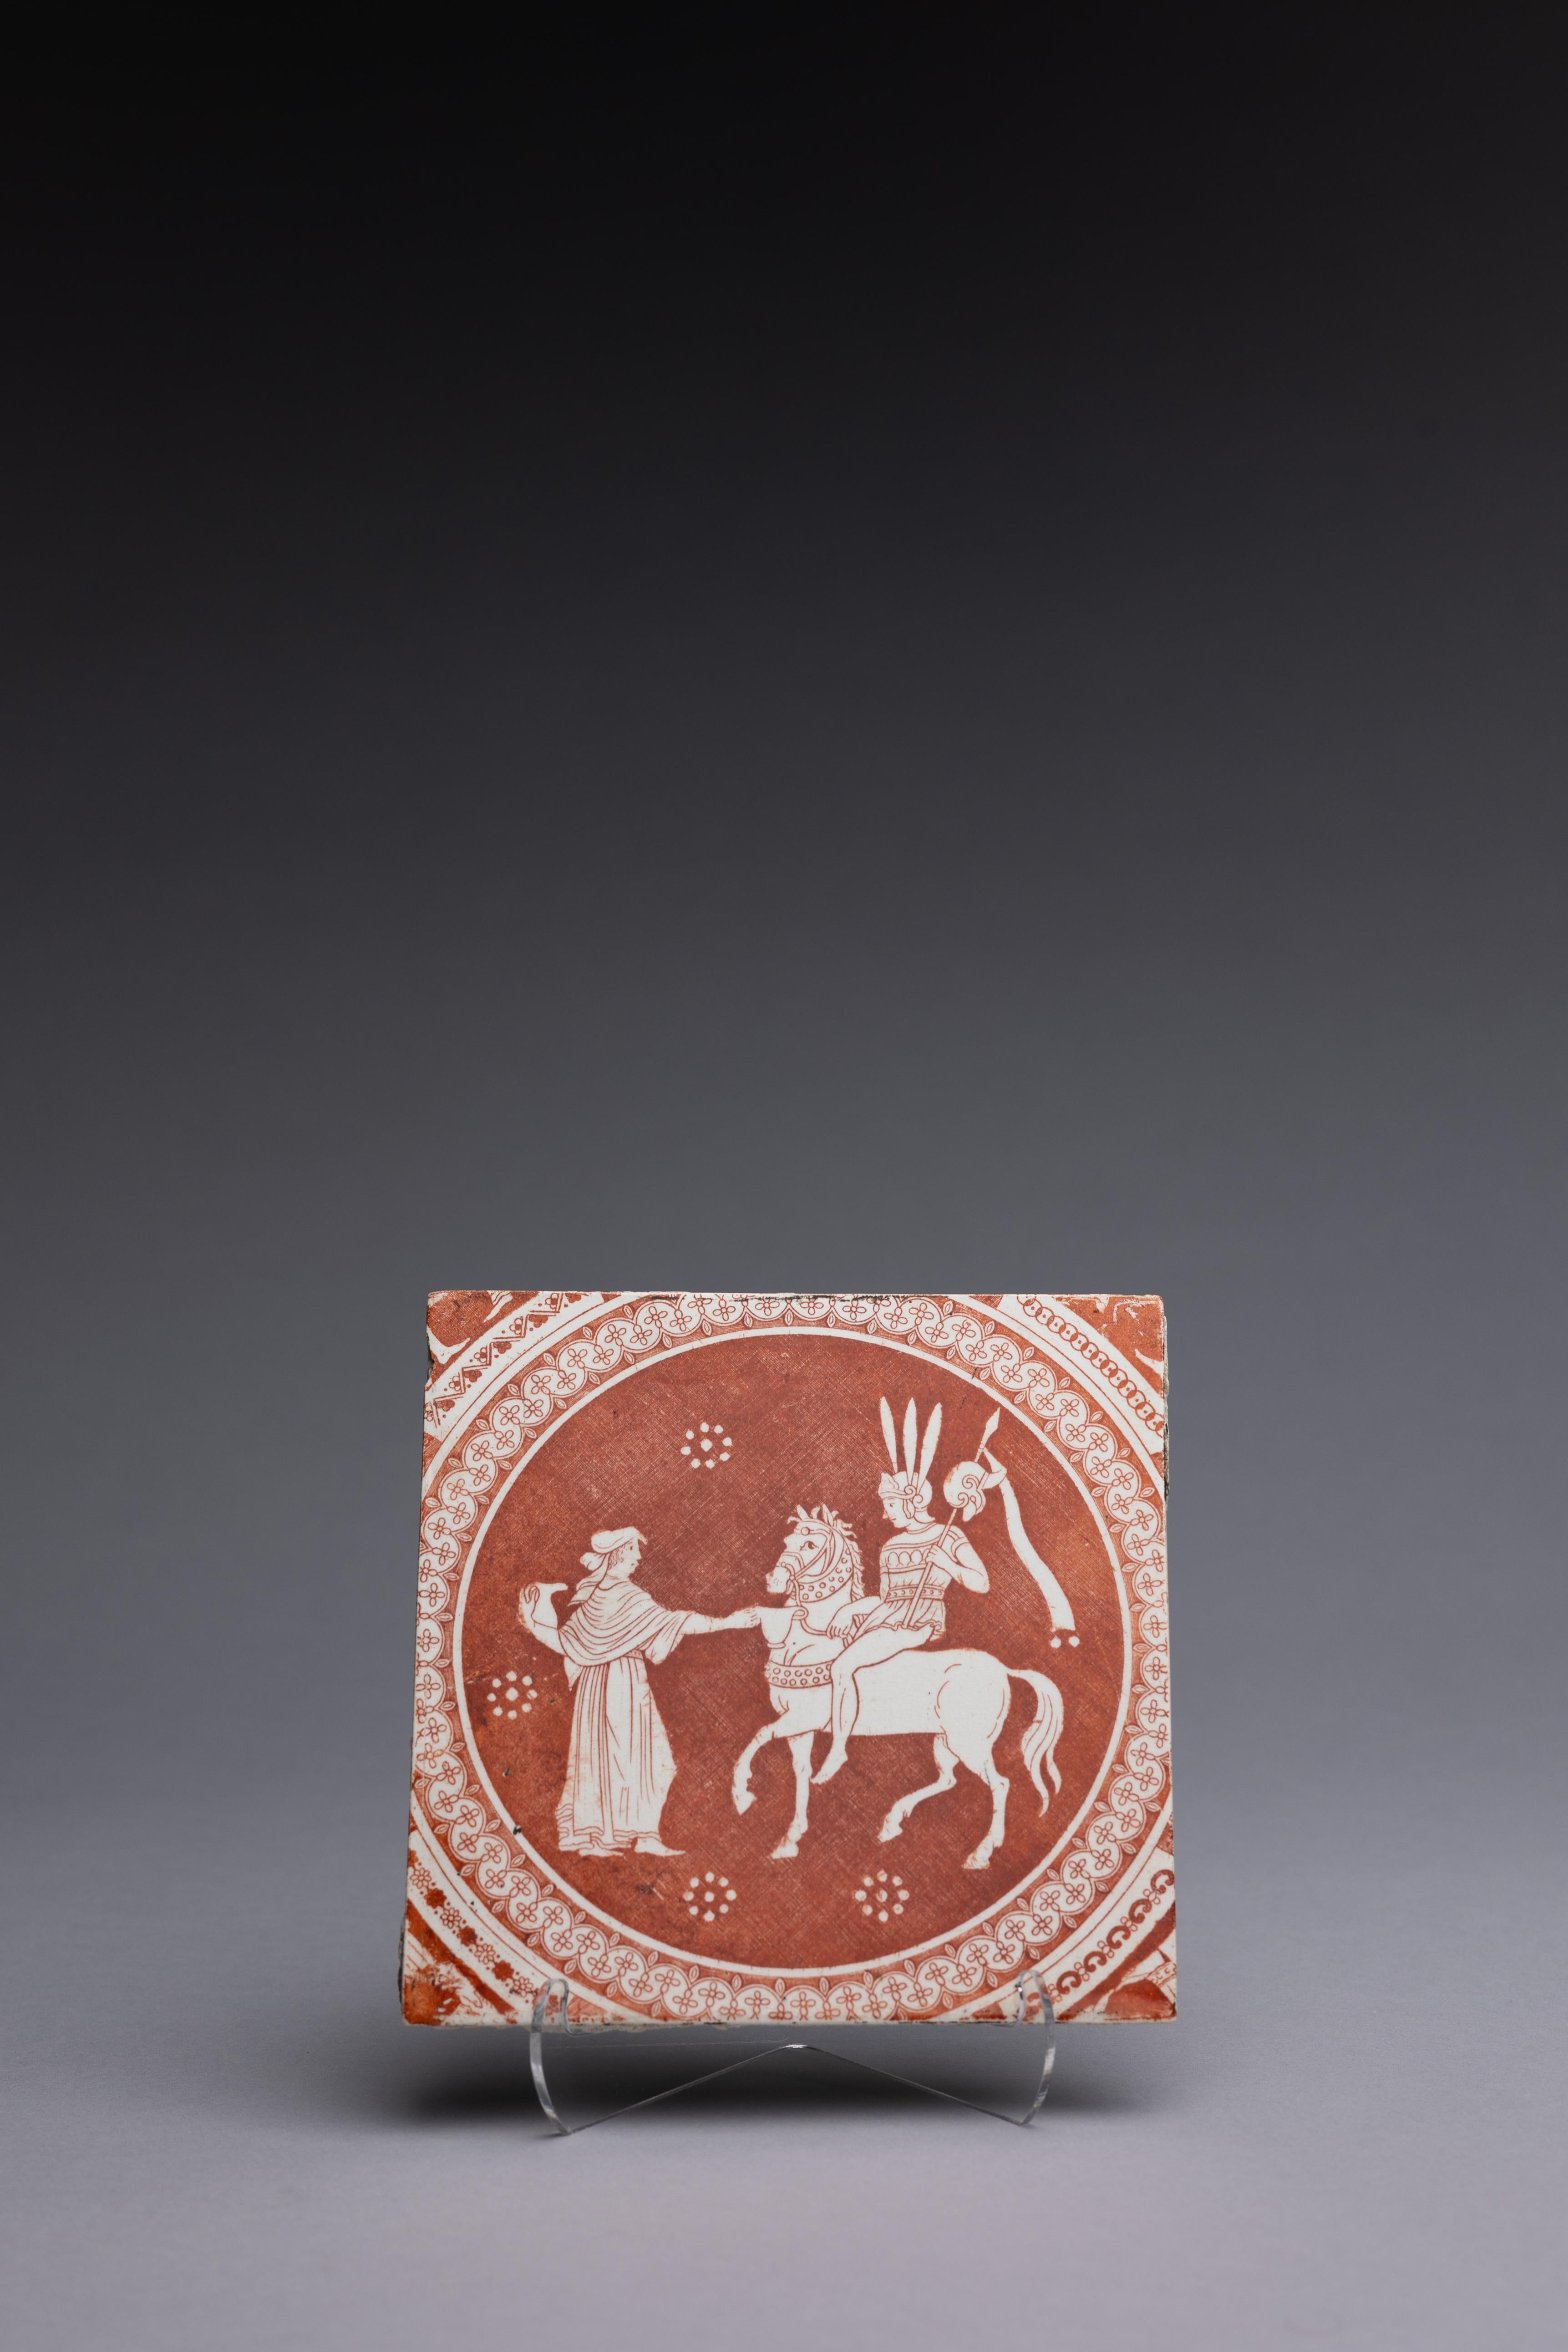 A Neoclassical red transferware tile made by Spode 1806-1810, with the ‘Refreshments for Phliasian Horseman’ pattern.

Sir William Hamilton’s Collection of Etruscan, Greek and Roman antiquities, first published in 1766 by Pierre d’Hancarville, was a